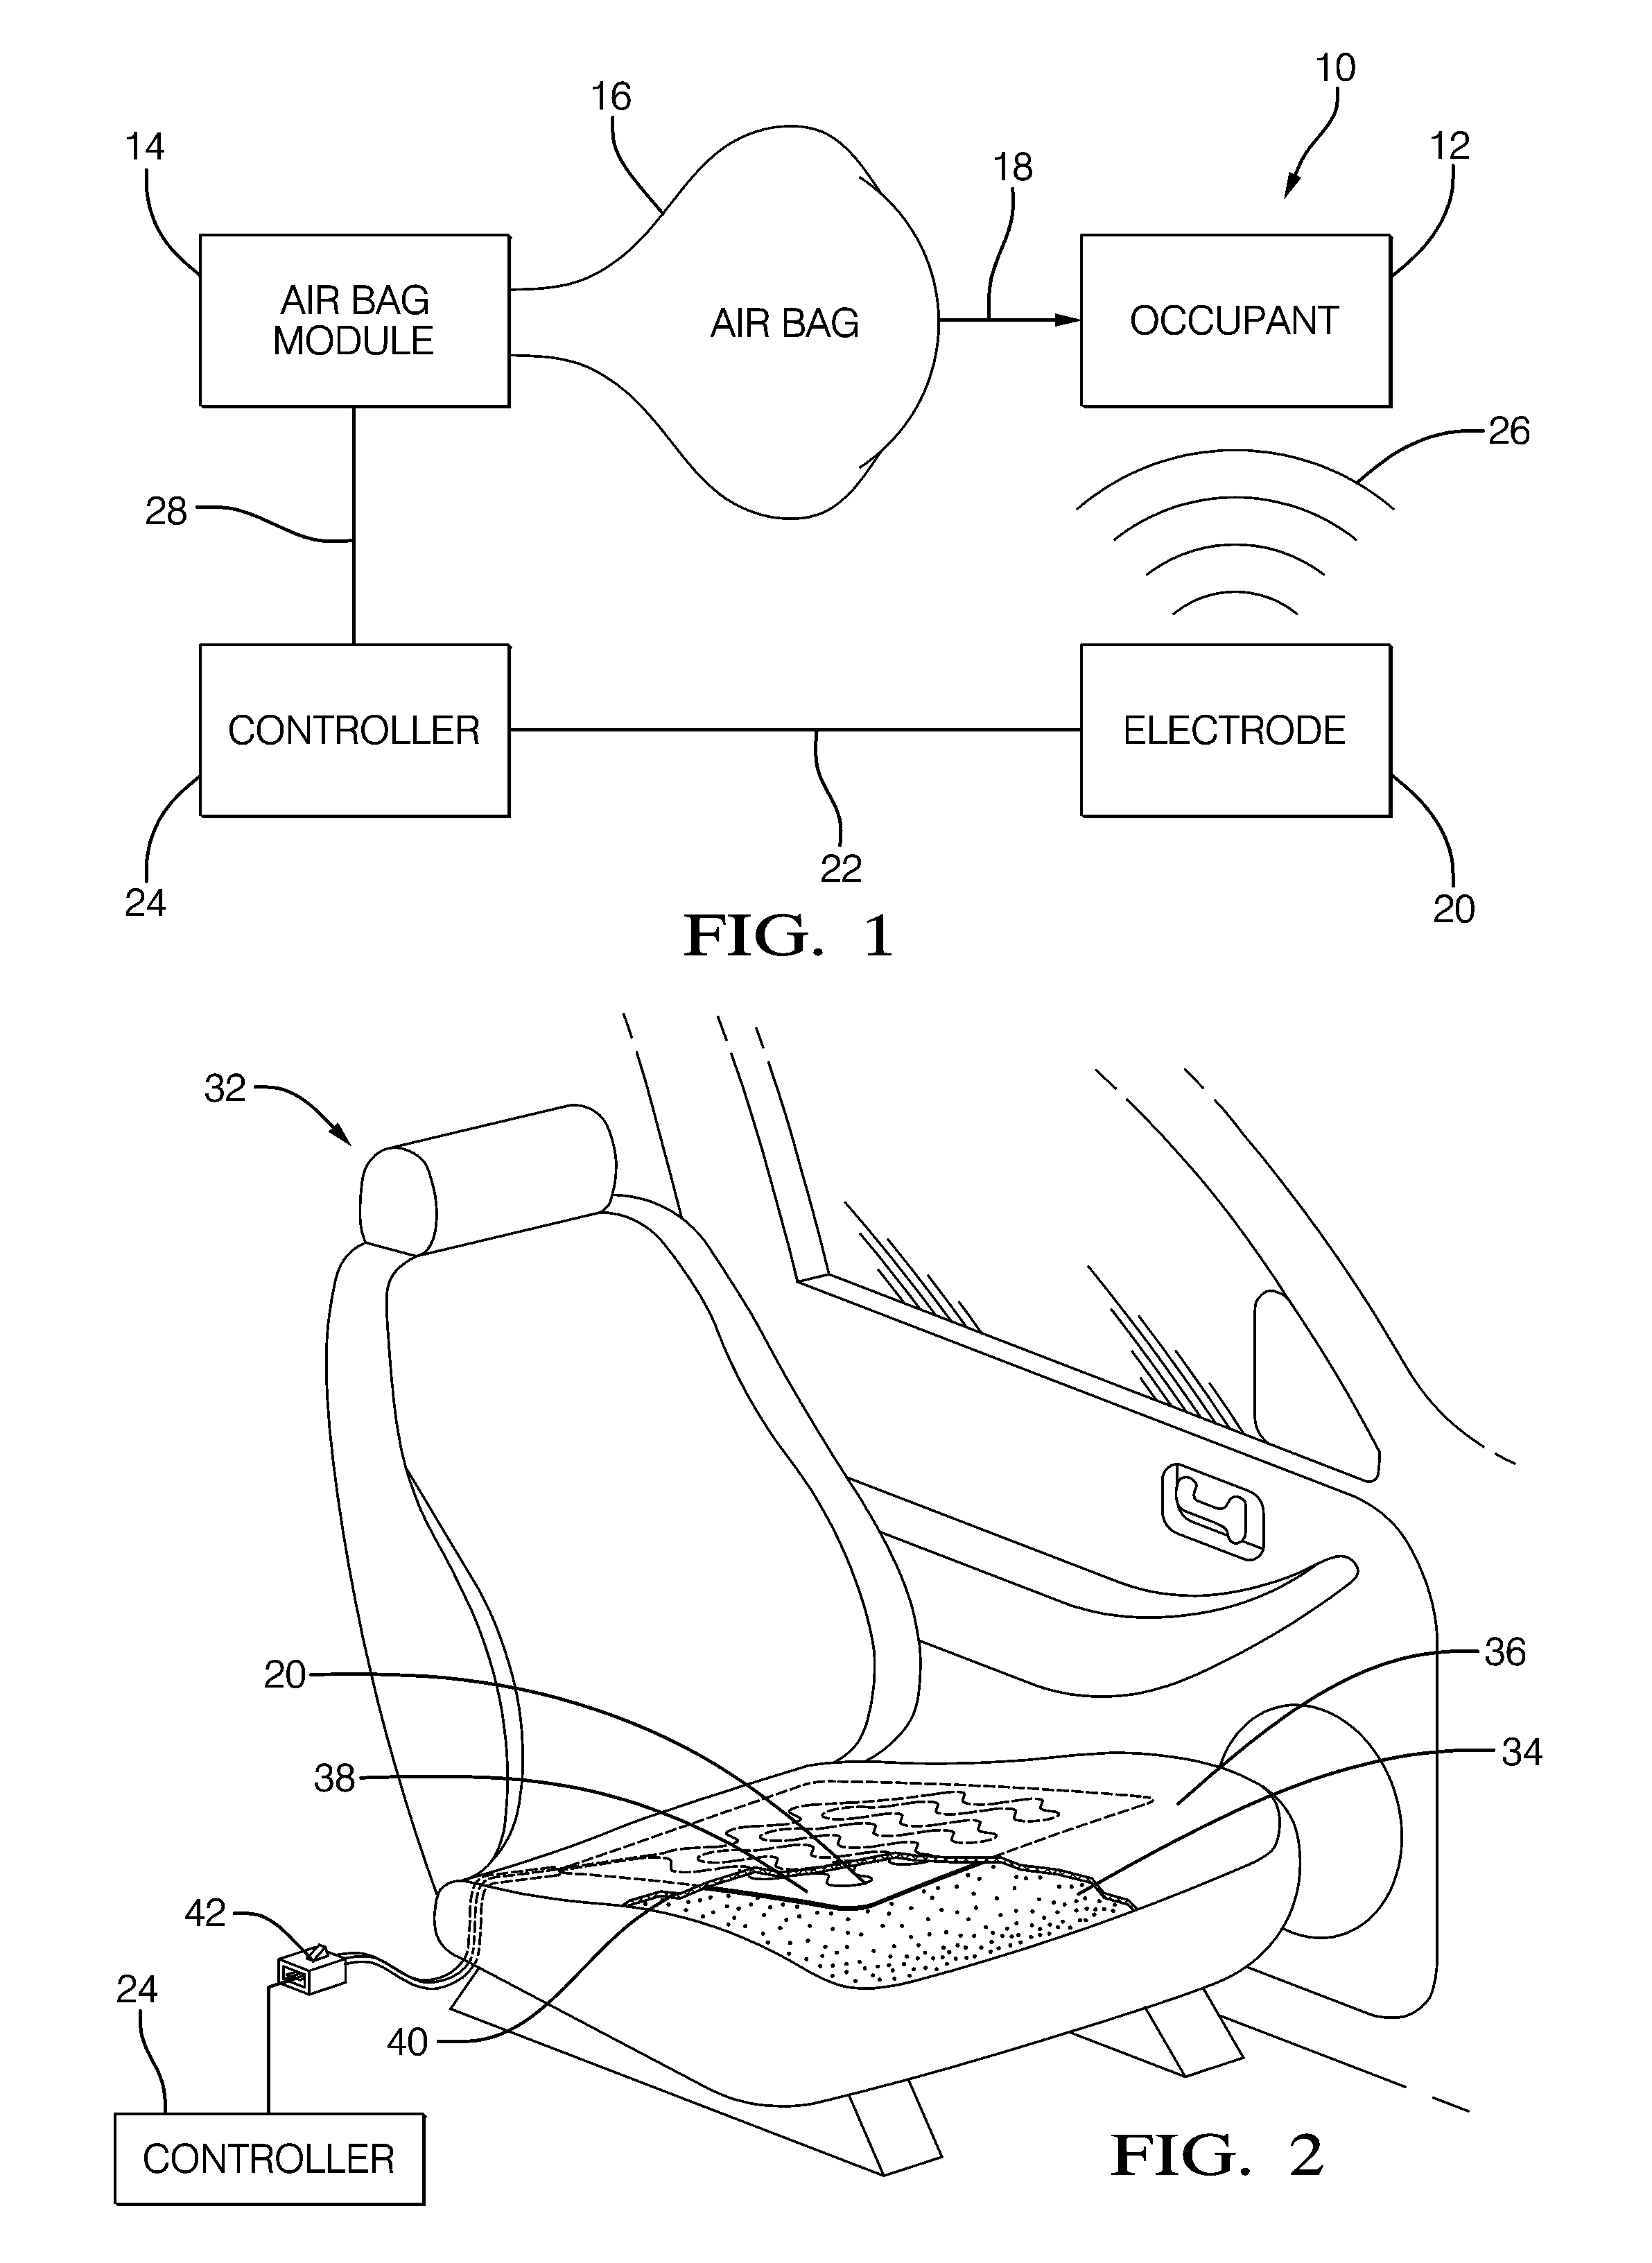 Occupant detection system and method